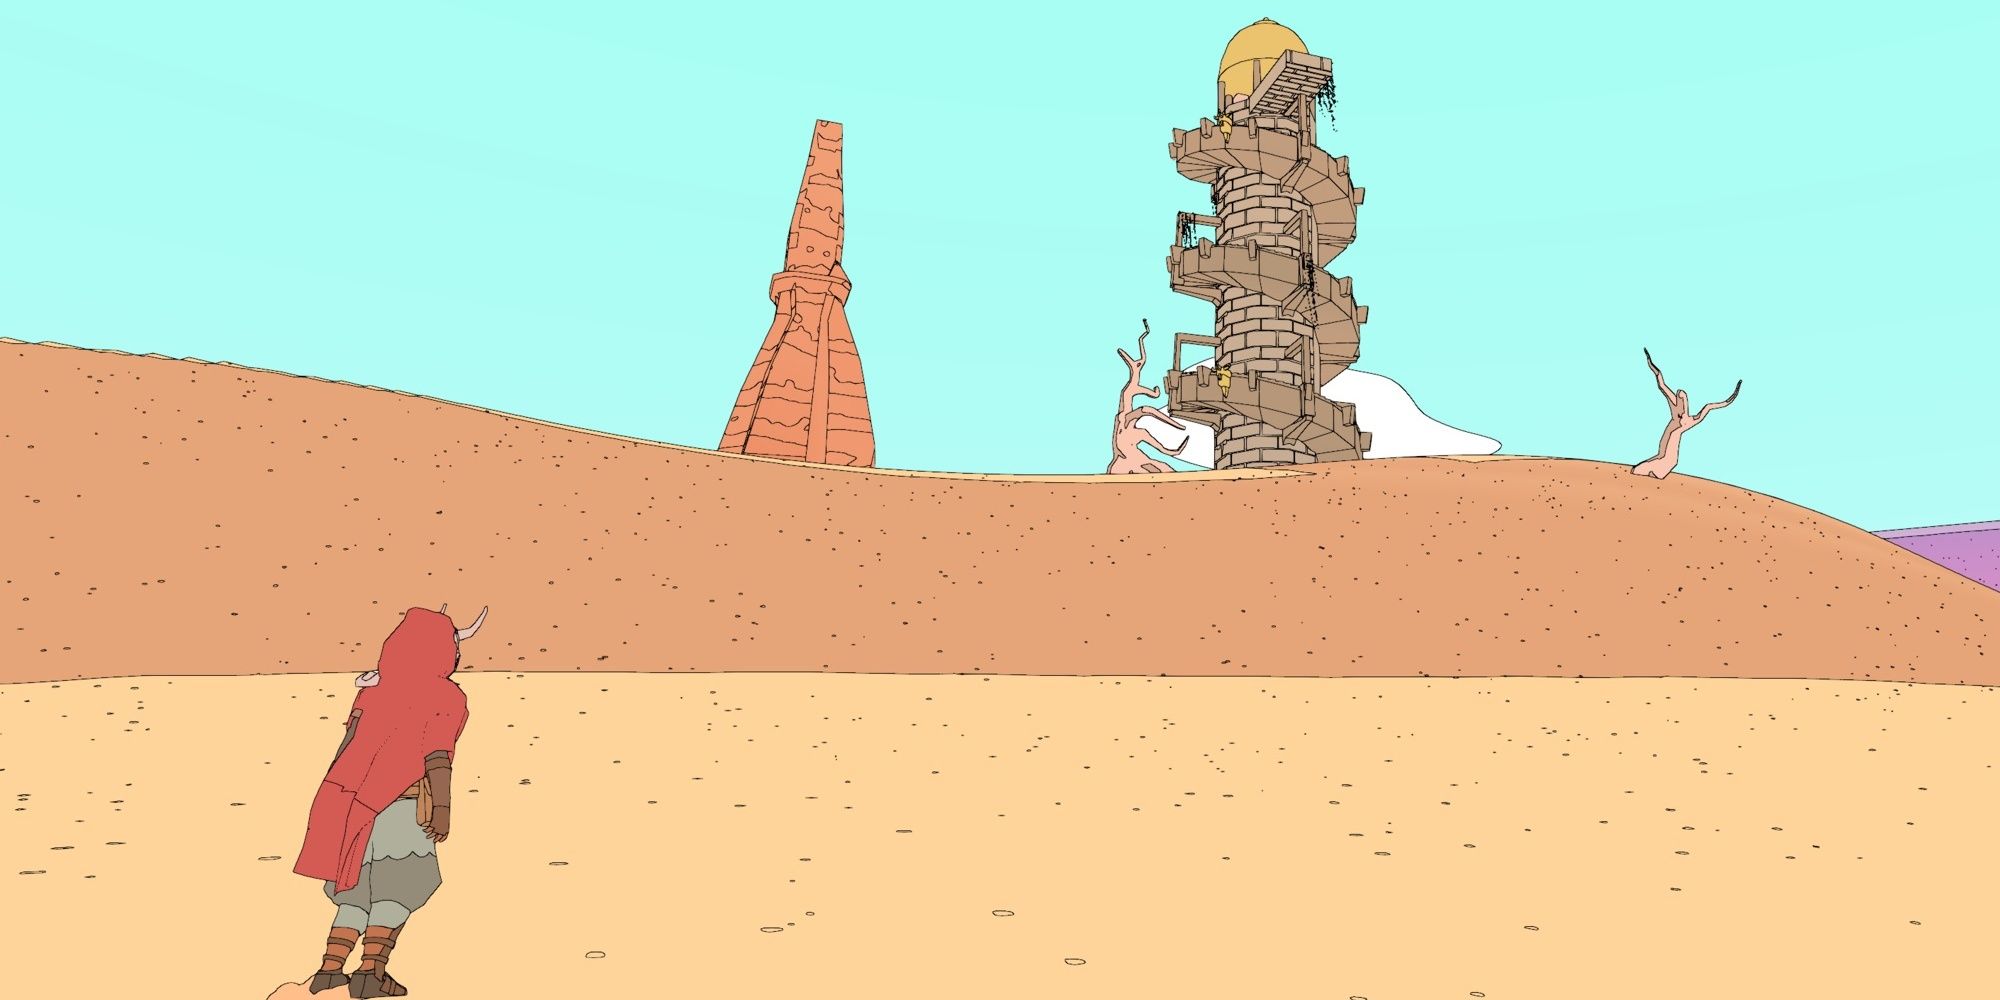 Sable, protag looking at a tower in the desert